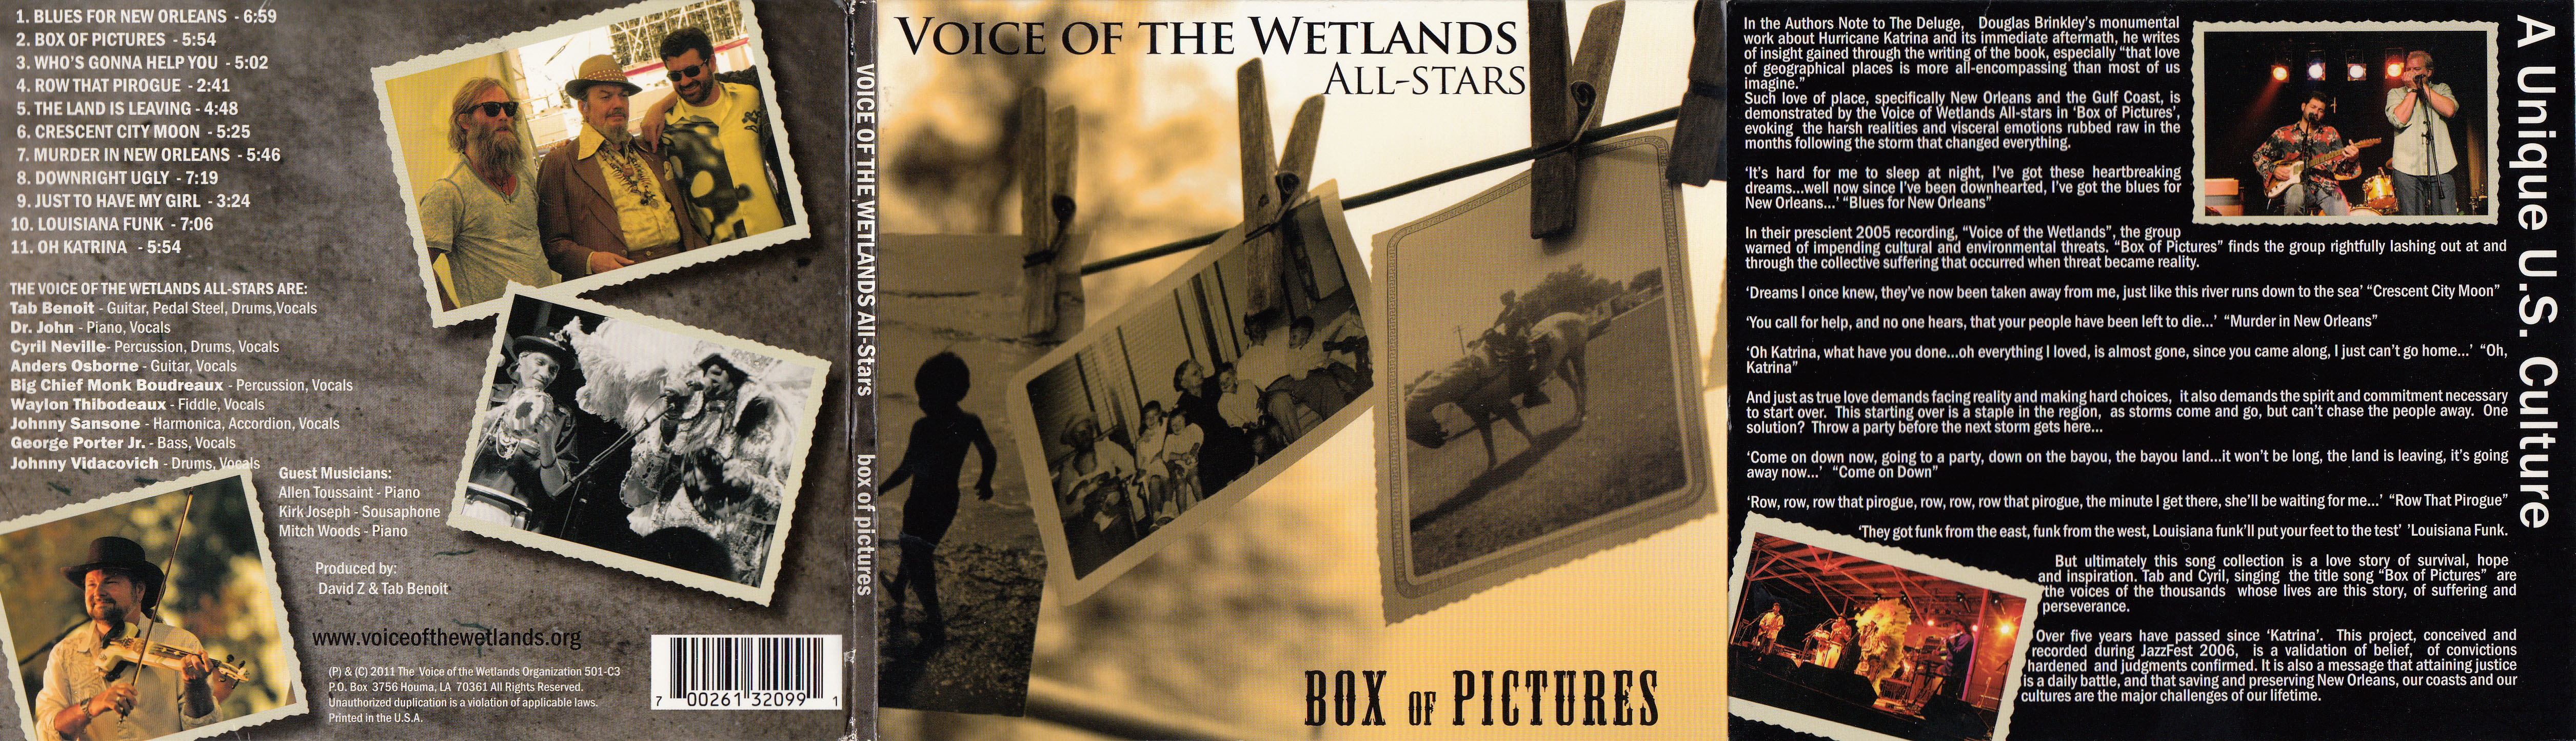 Tab Benoit Voice Of The Wetlands All-Stars 2011 - Box Of Pictures